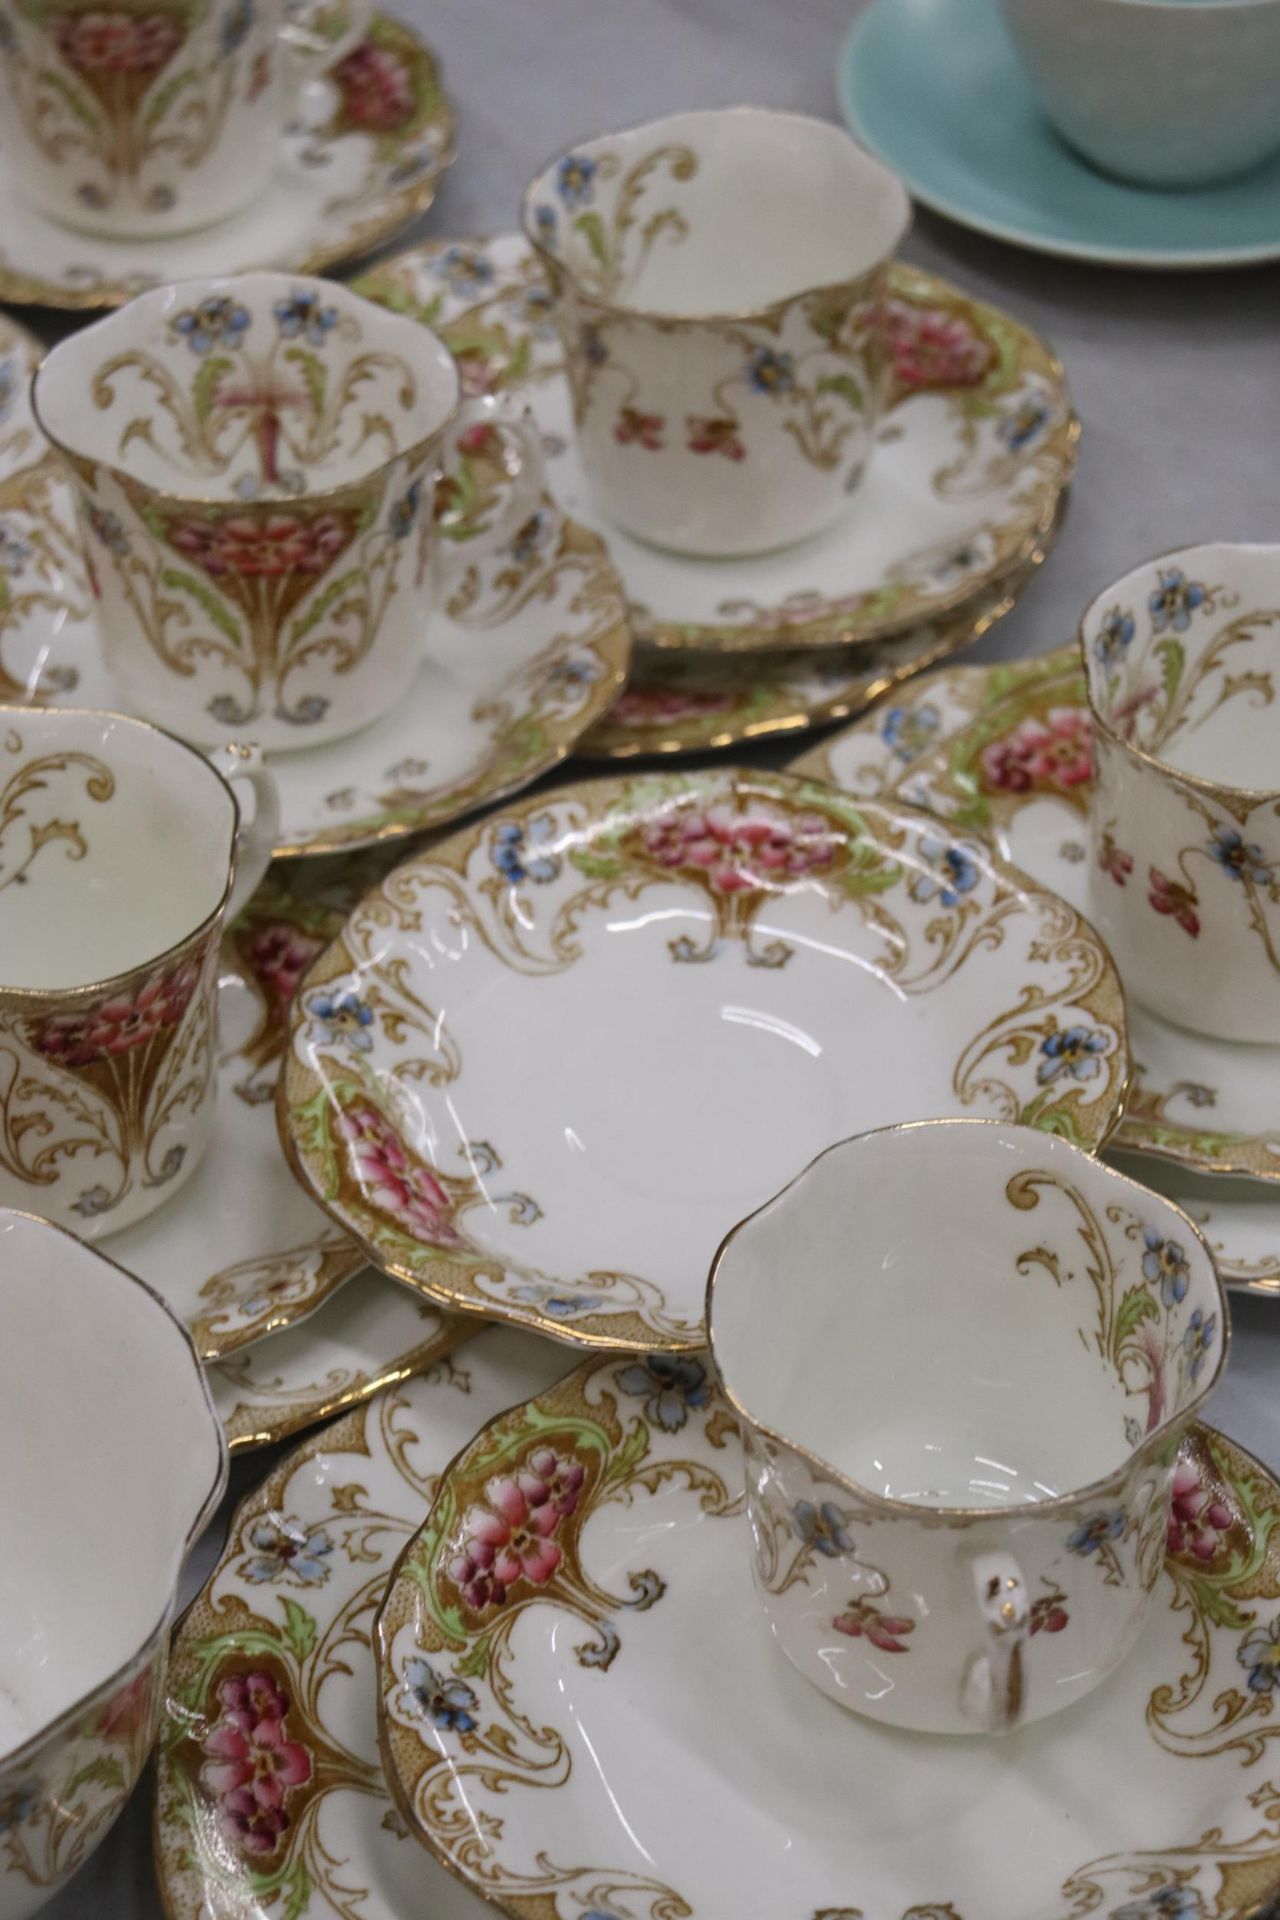 A LATE 18TH/EARLY 19TH CENTURY TEASET BY FRED B PEARCE & CO, LONDON, TO INCLUDE CAKE PLATES, A CREAM - Image 6 of 10